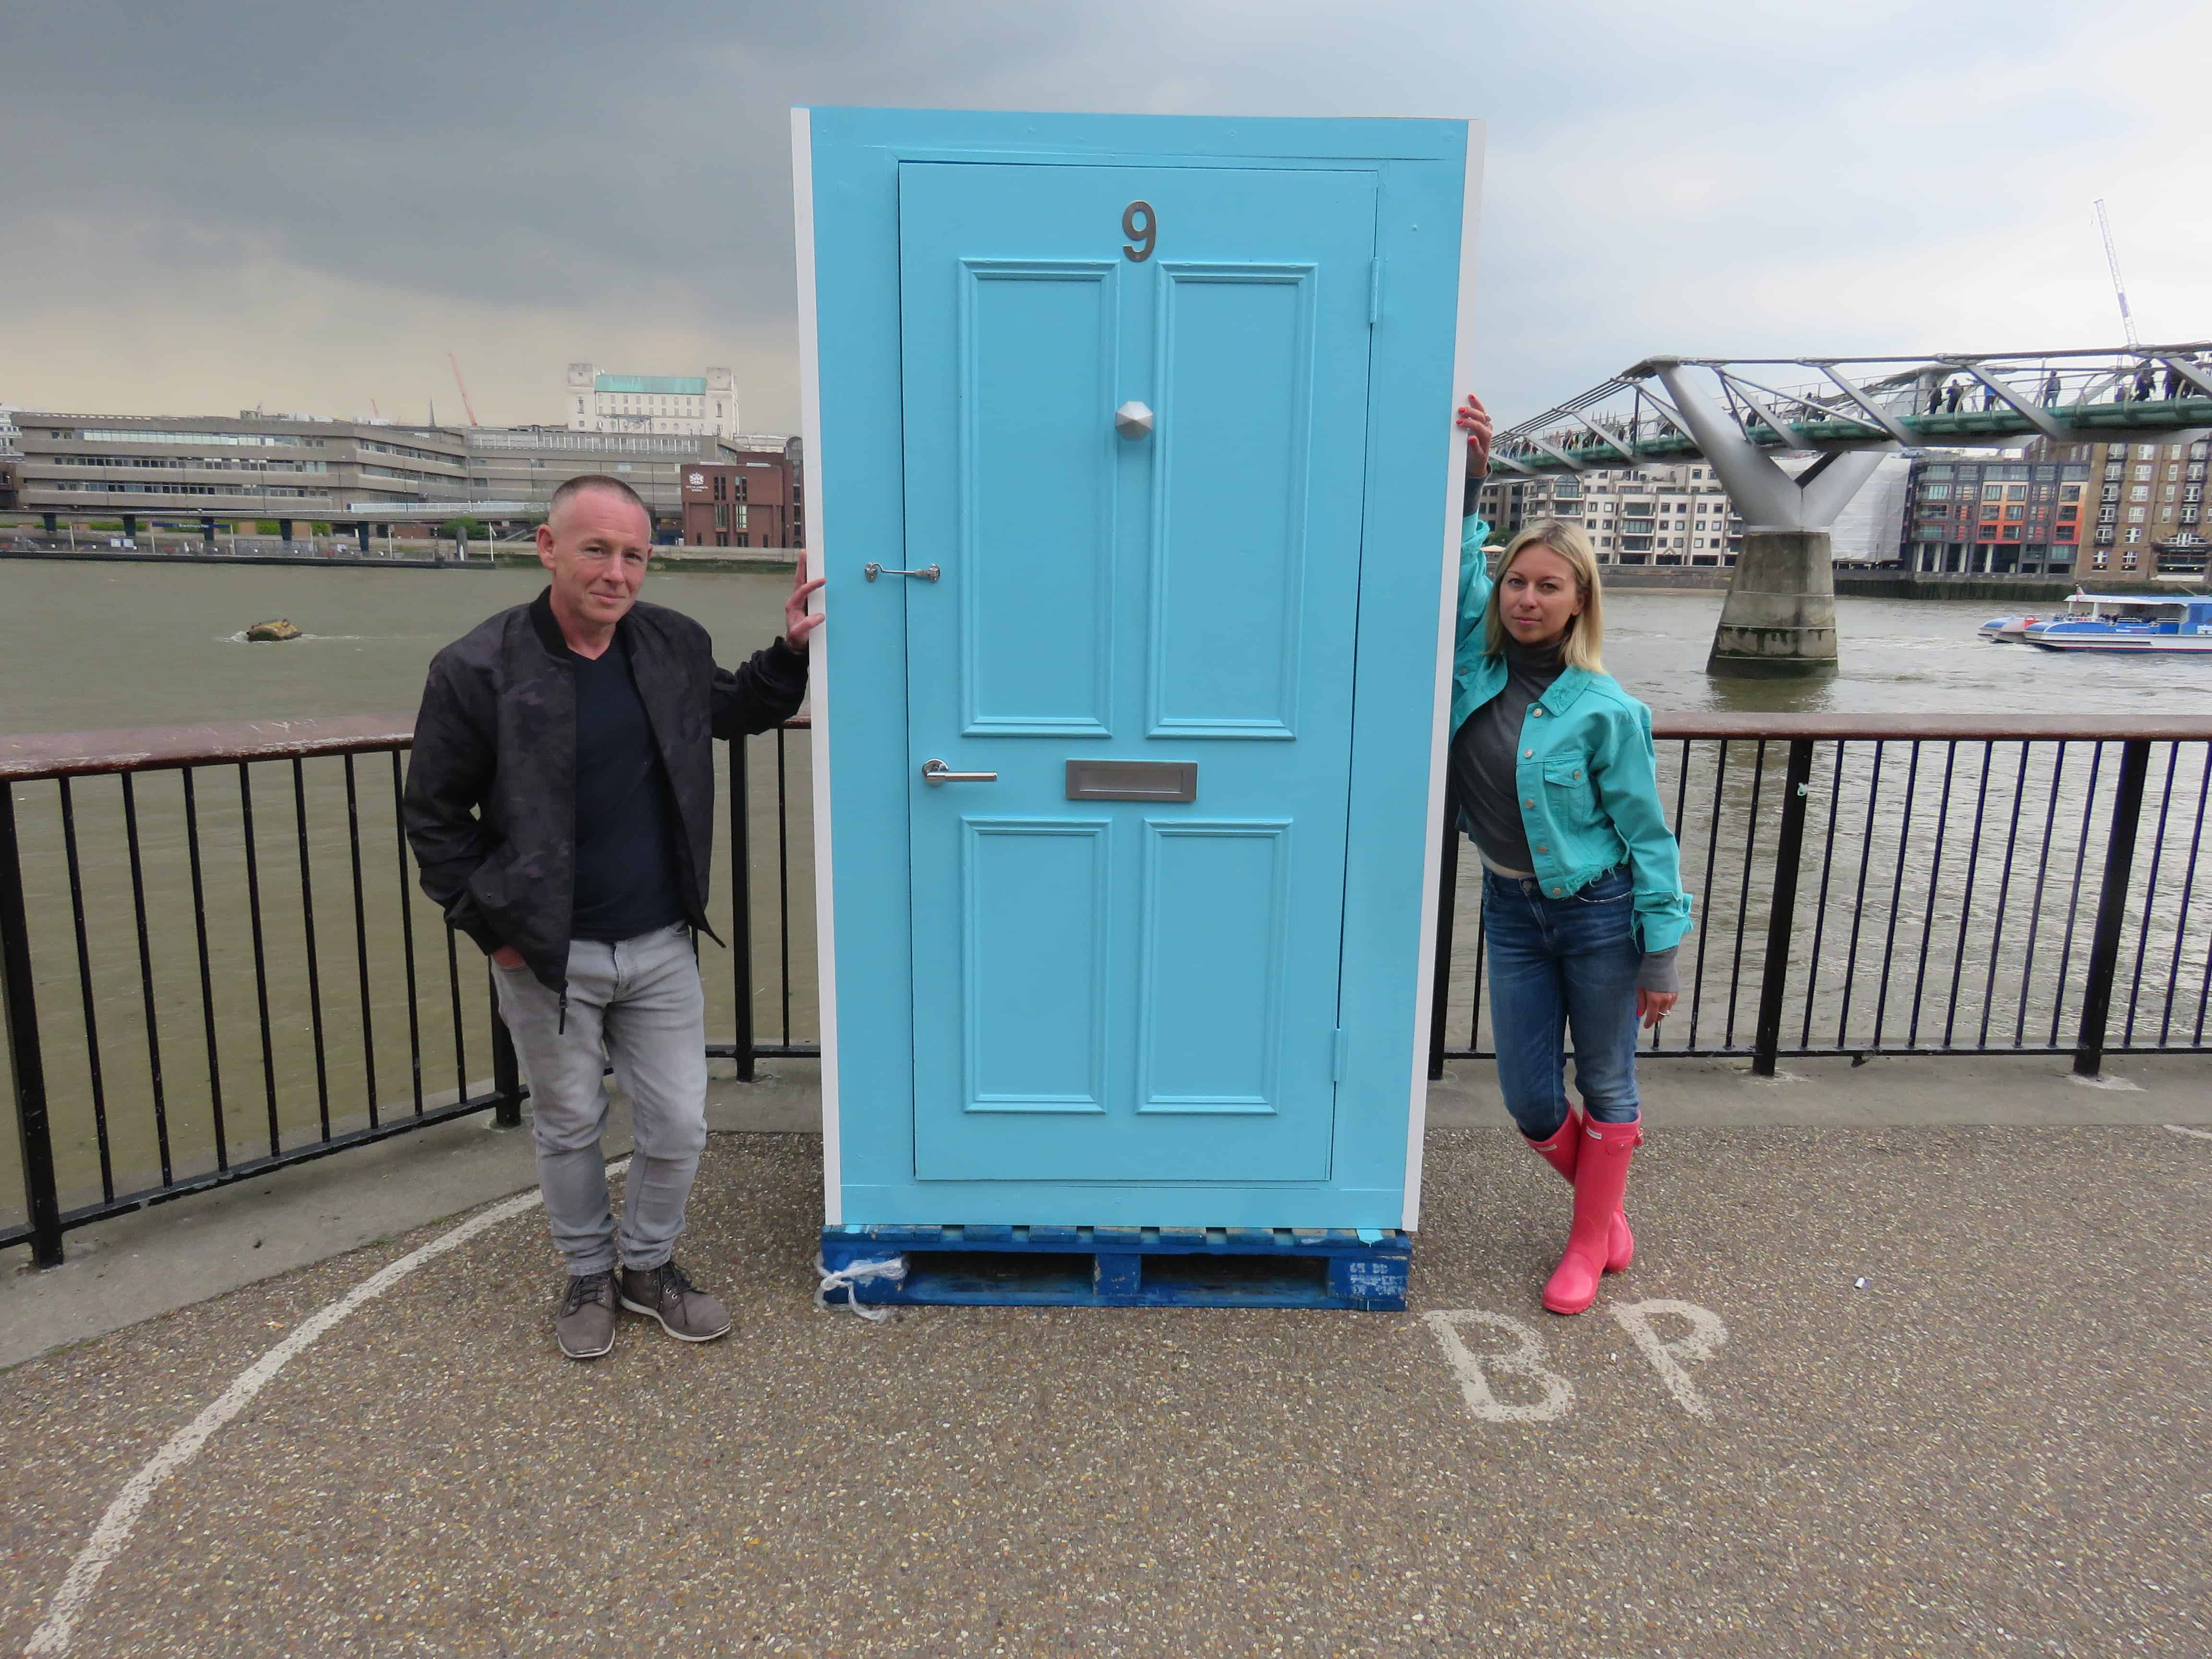 Paul Quigley, (L) and Nadia Filitova (R) next to their home-made 'Time Booth' which people can scream as loud as they like into